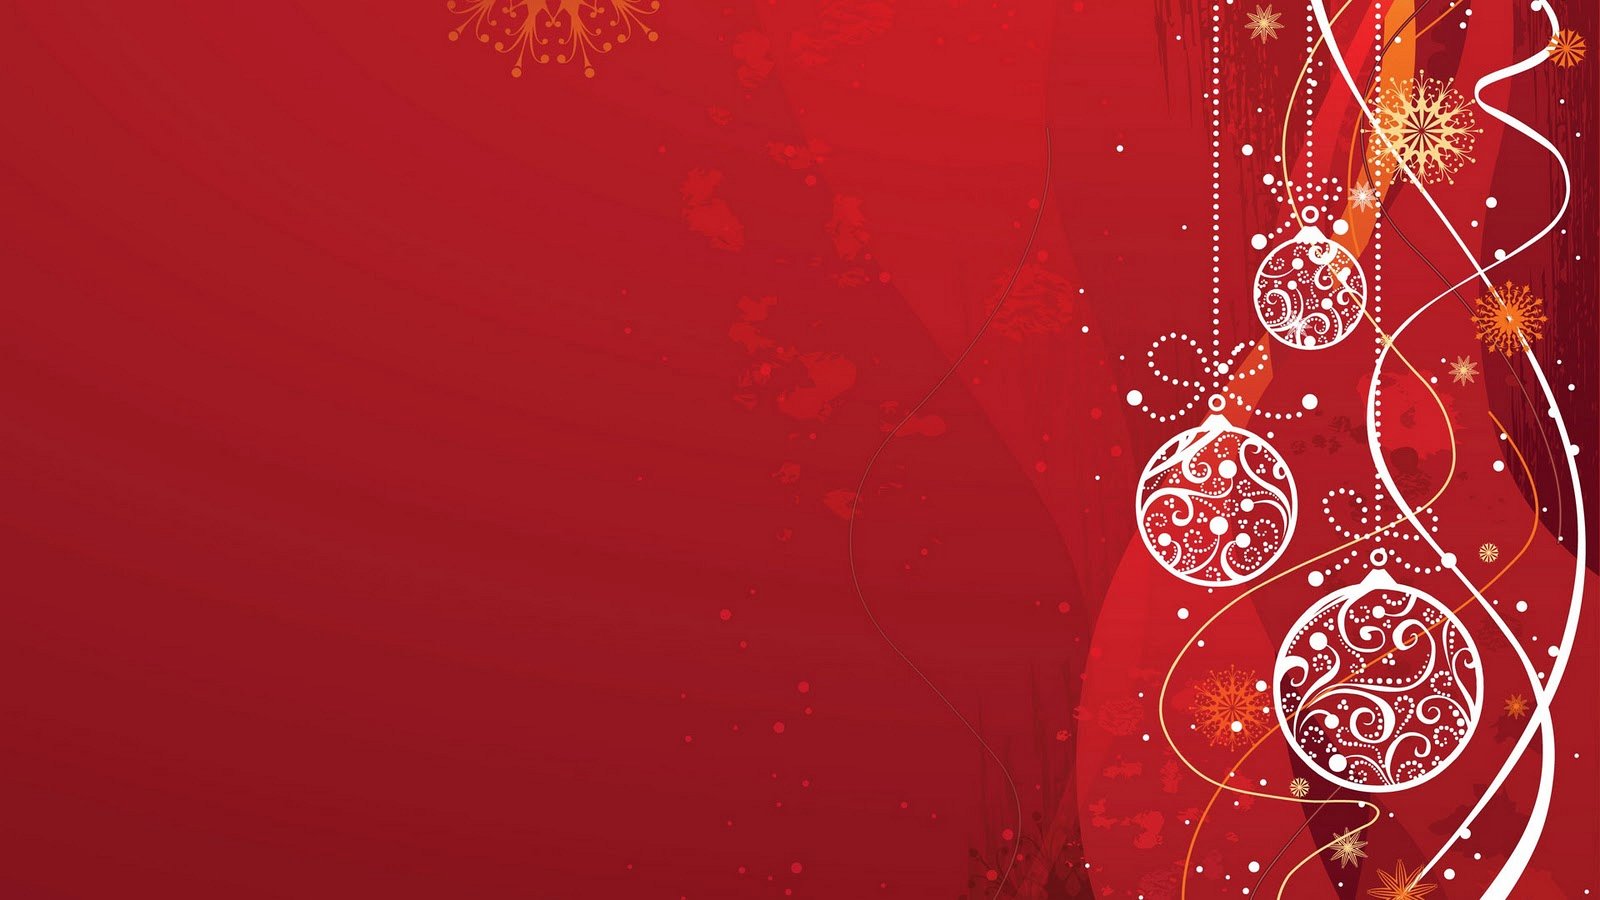 Wallpaper Christmas Abstract Red White